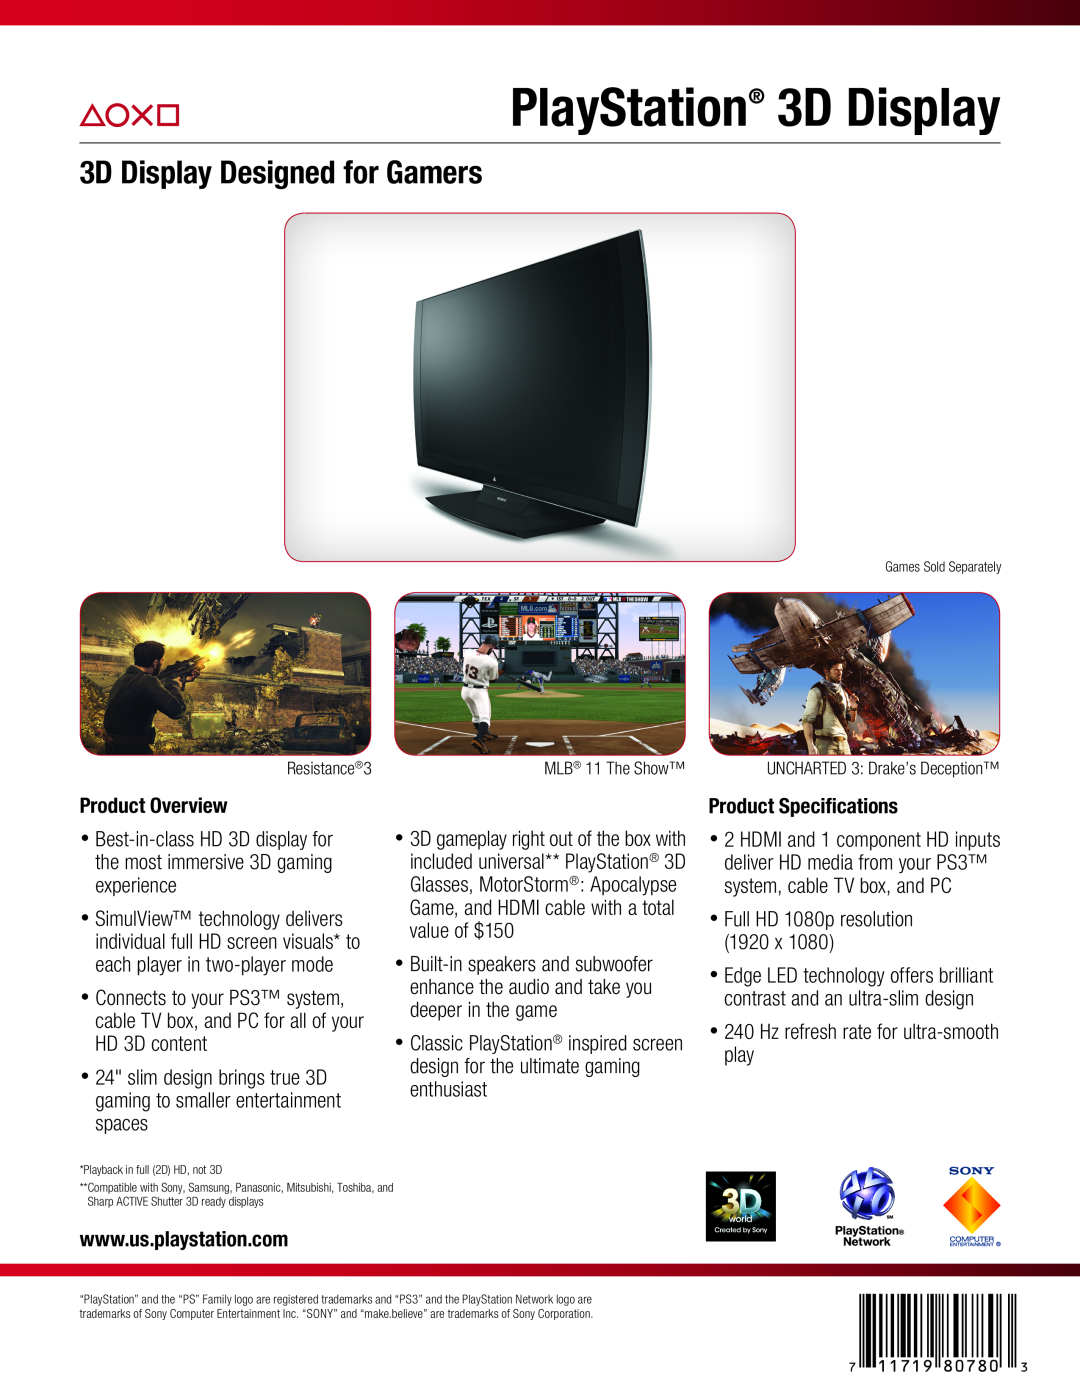 Sony 98078 dimensions PlayStation 3D Display, 3D Display Designed for Gamers, Product Overview, Product Specifications 